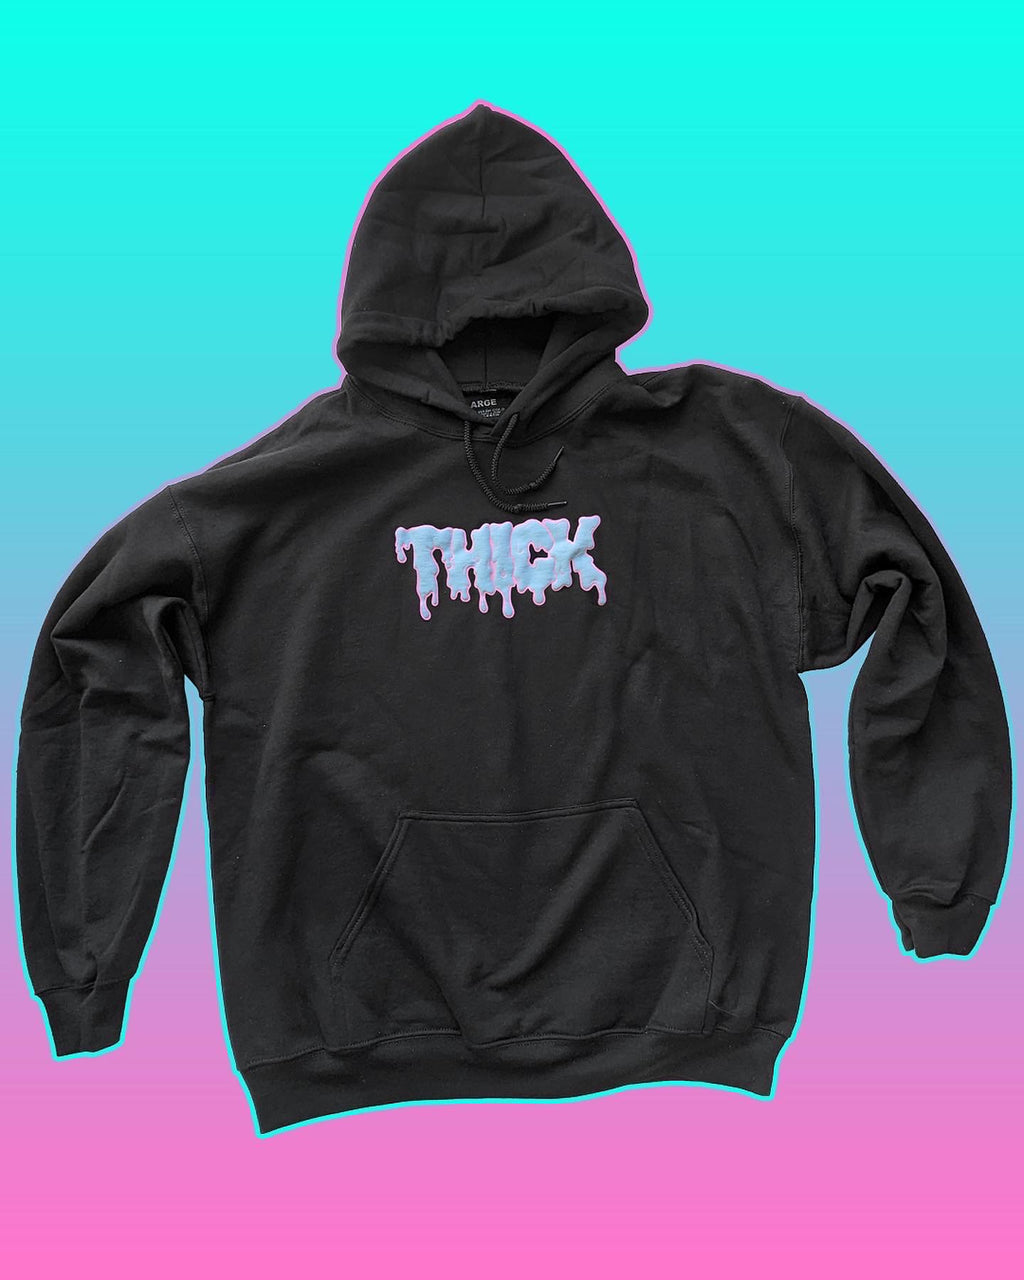 “Cotton Candy” THICK Puff Print Hoodie